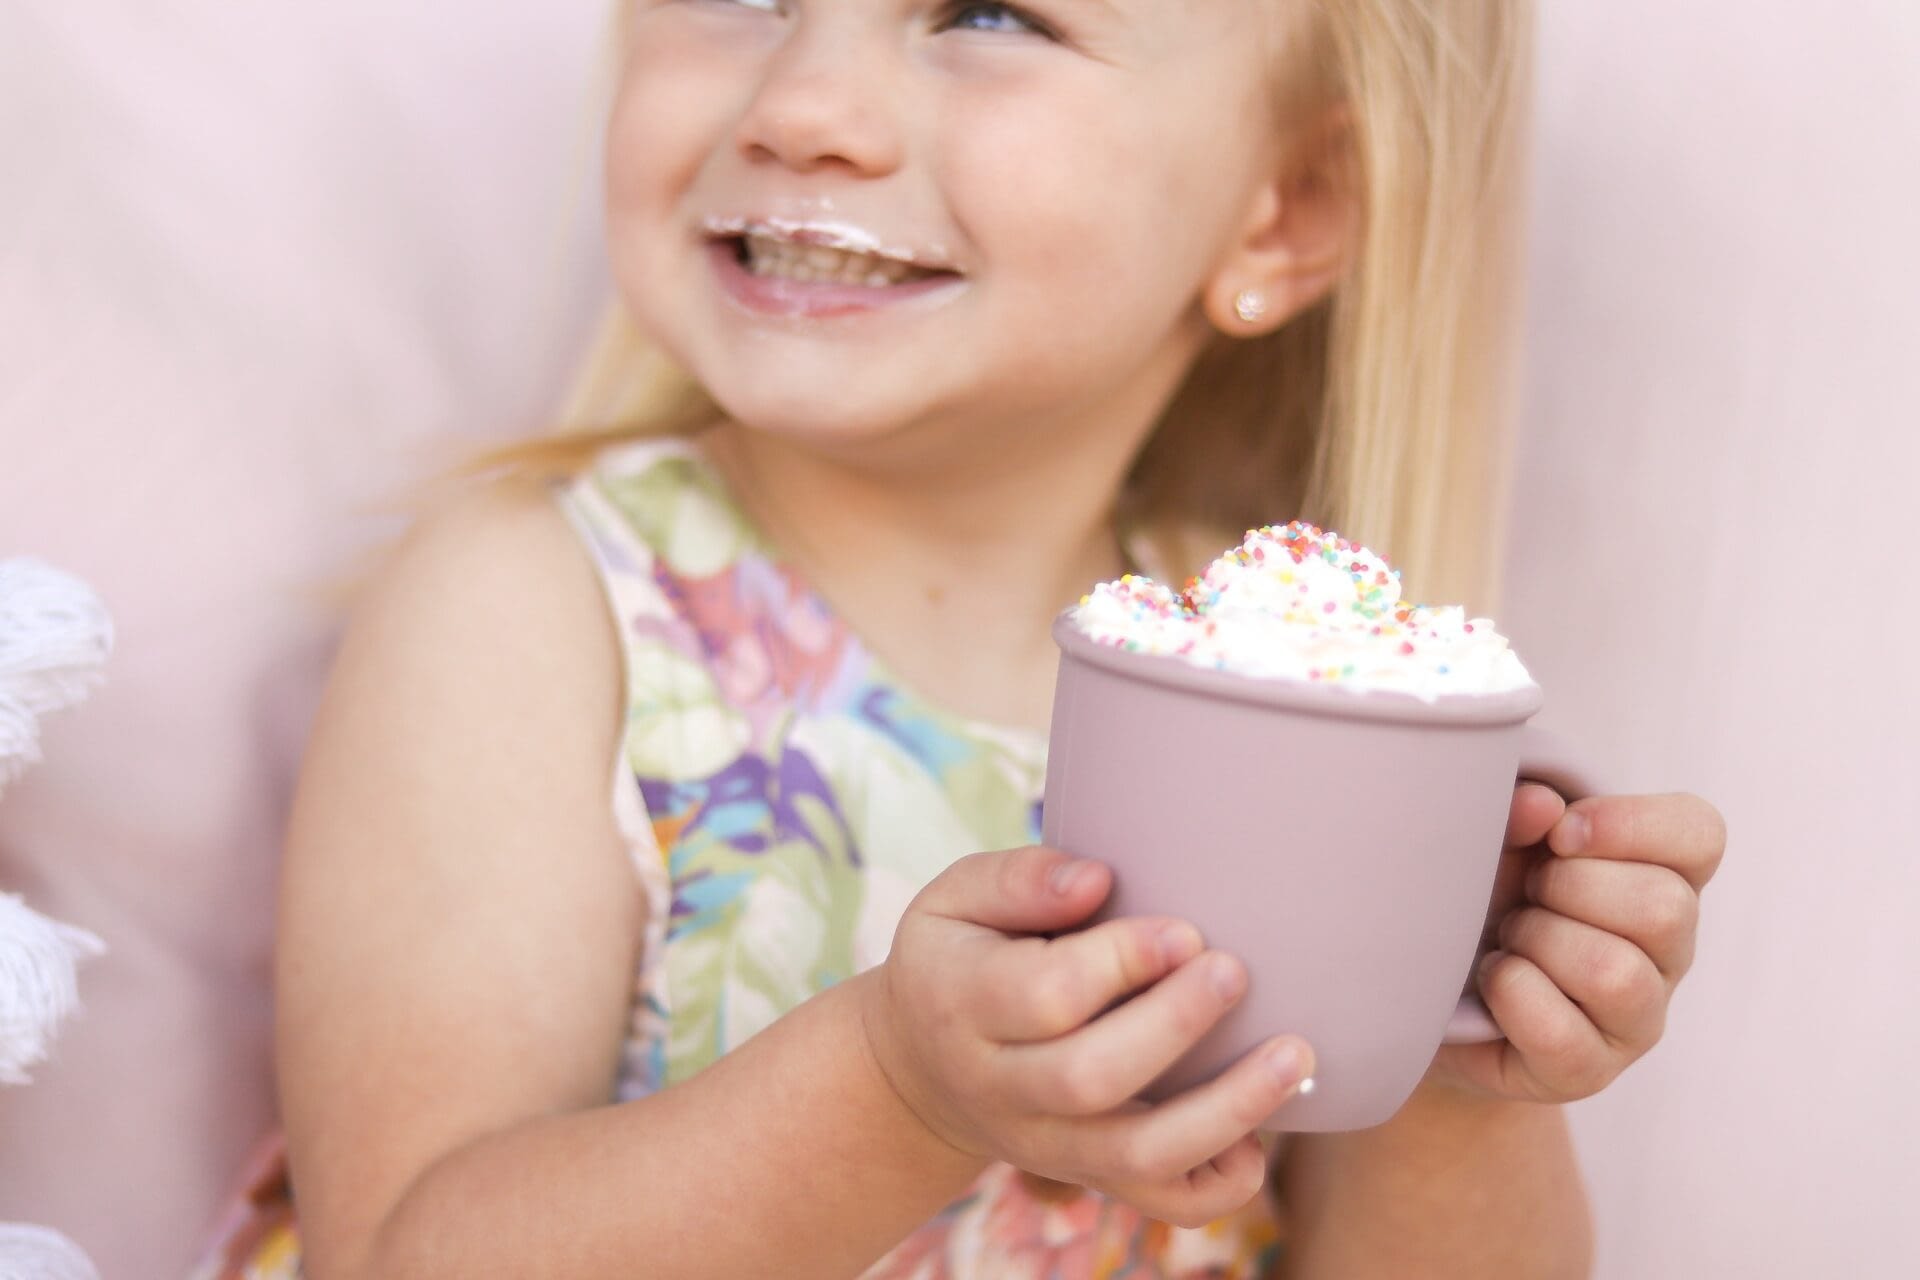 Blonde haired girl smiling drinking a babychino from a pink mug. she has a milk moustache